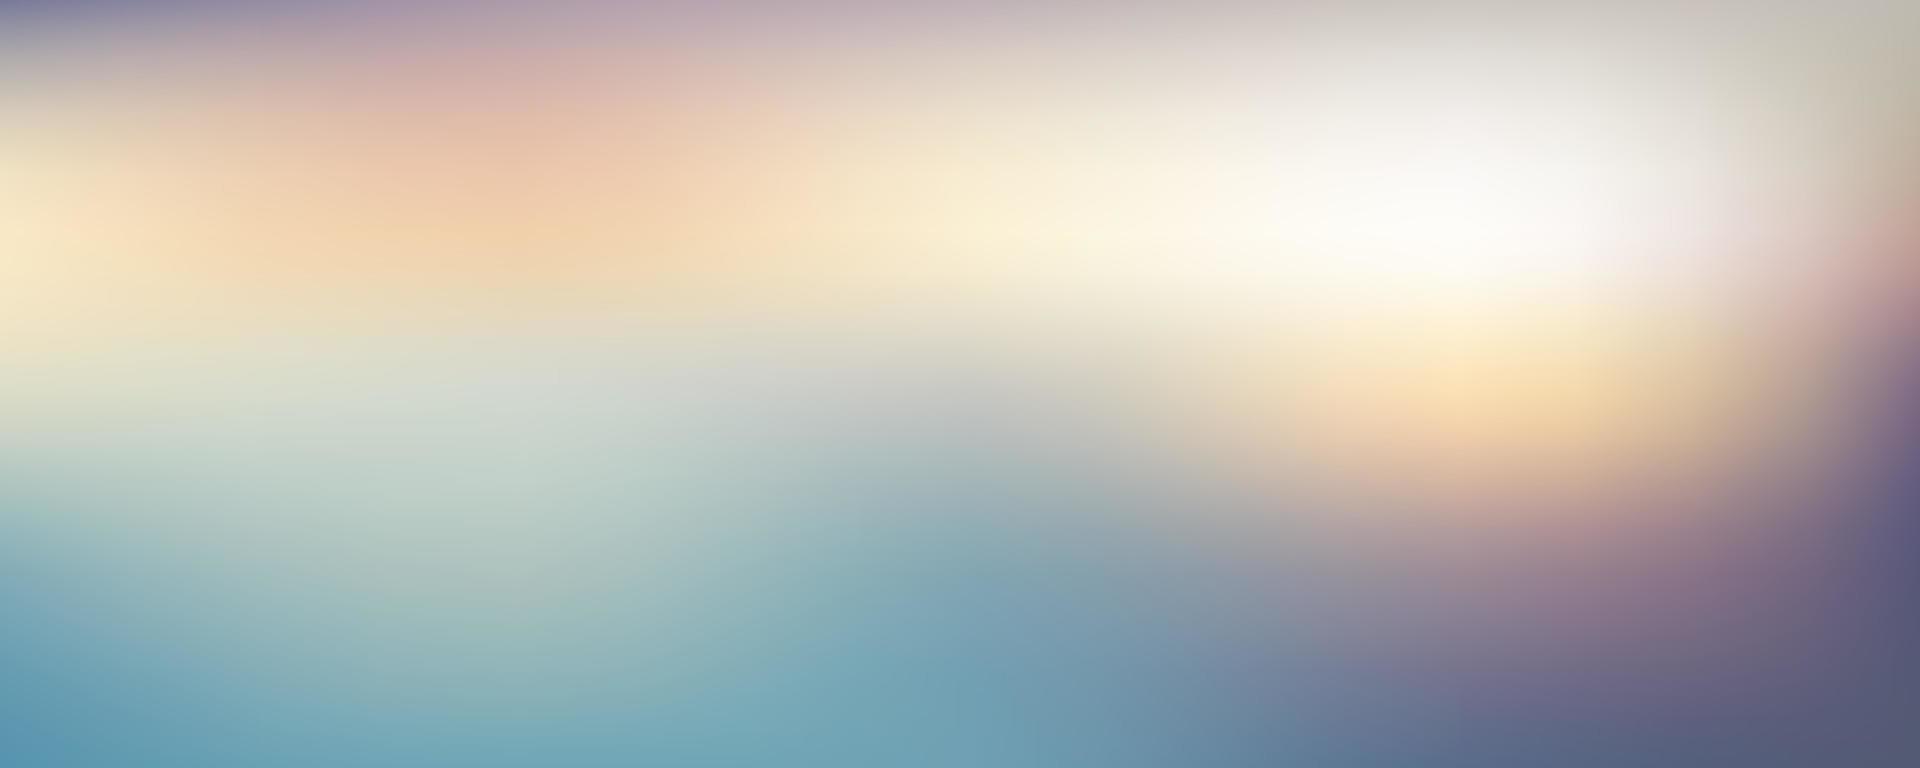 Abstract blurred gradient twilight background. Colorful sky with sunlight. vector